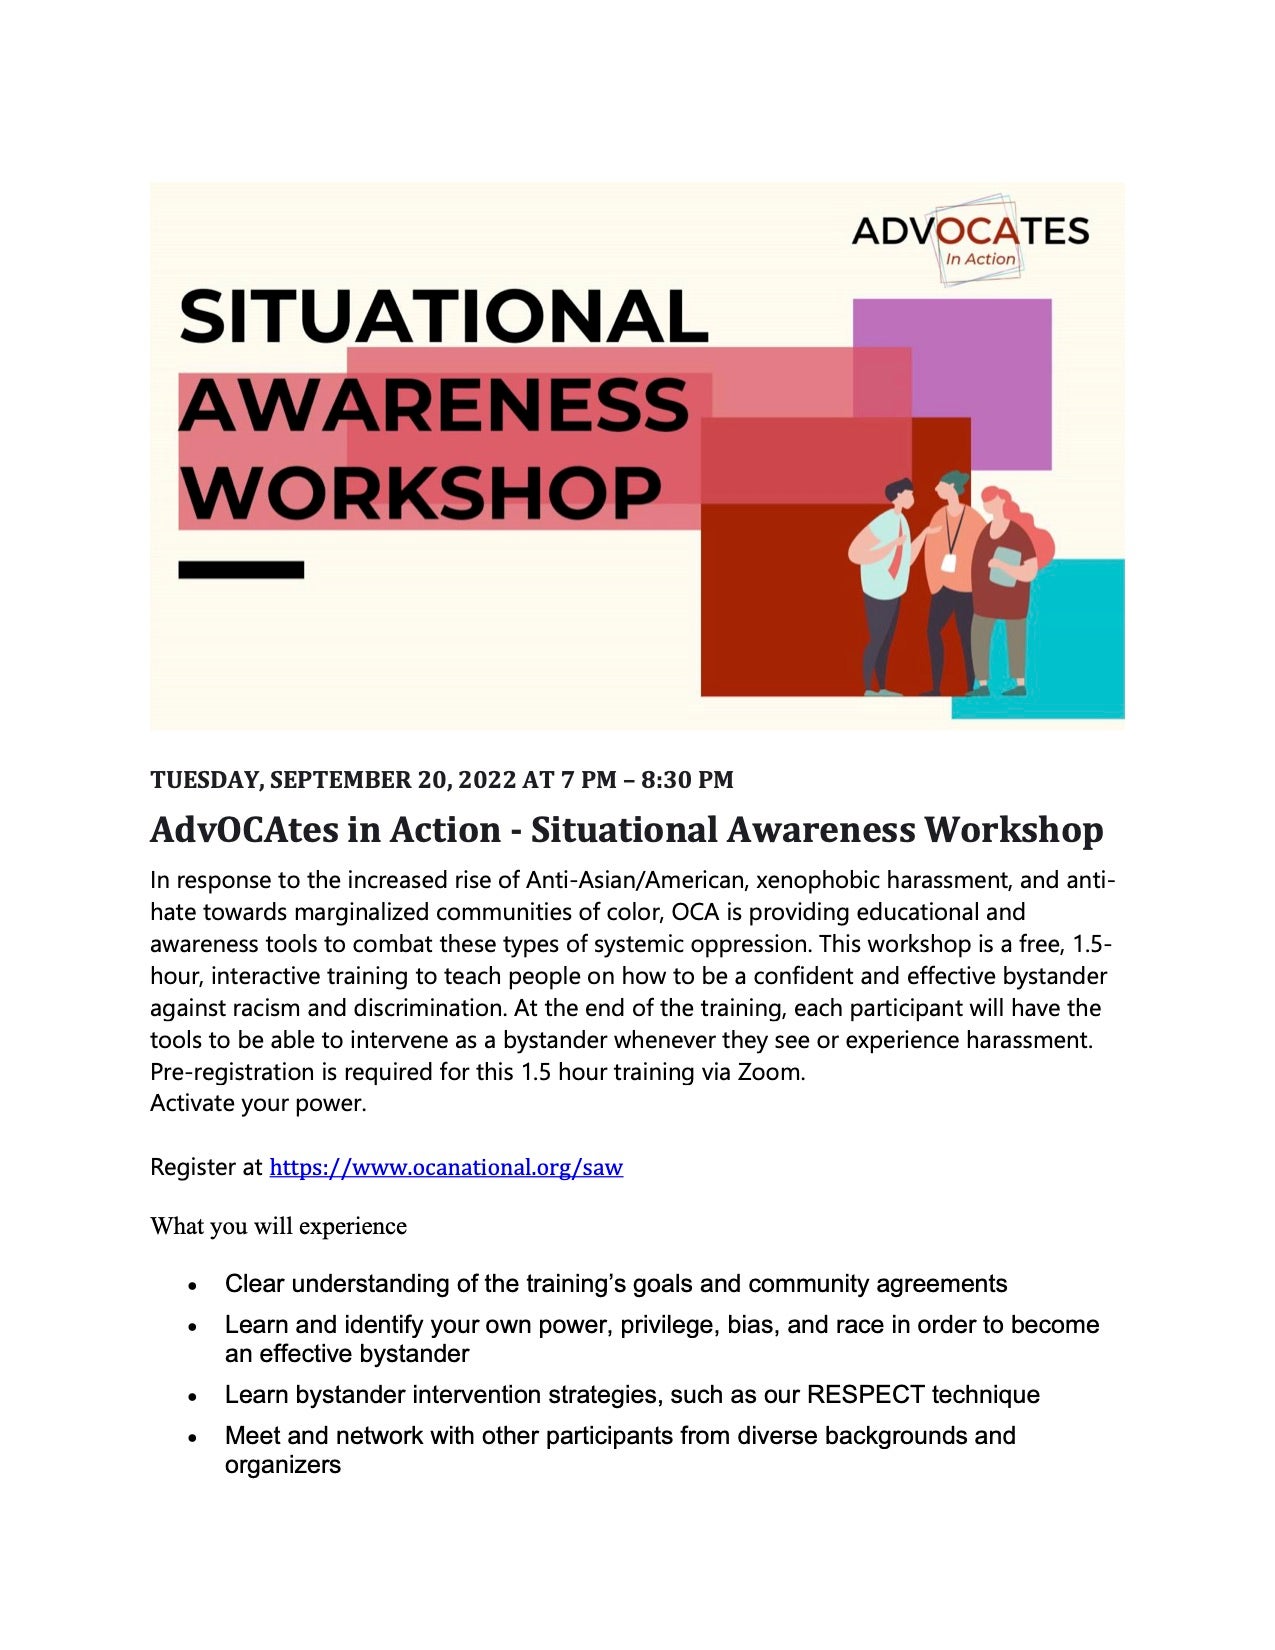 Announcement for Situational Awareness Workshop